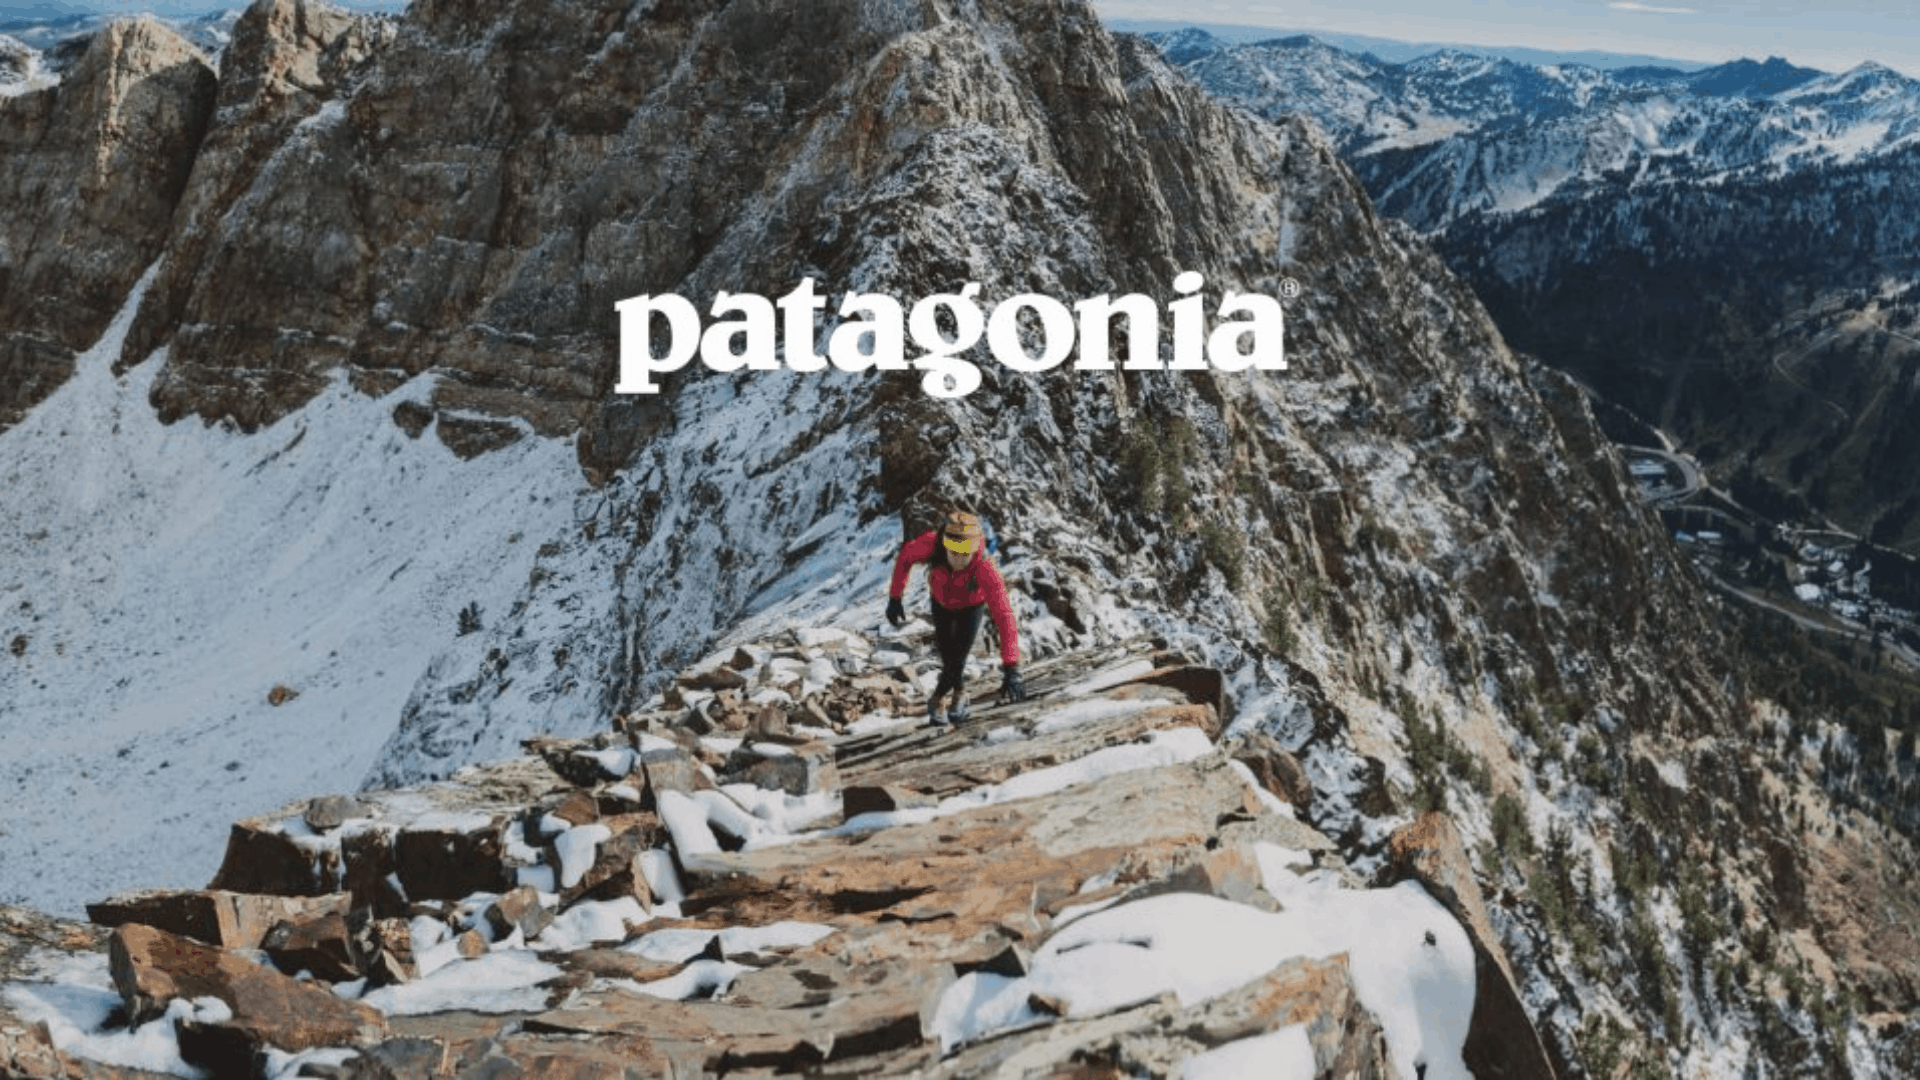 A Patagonia ad campaign